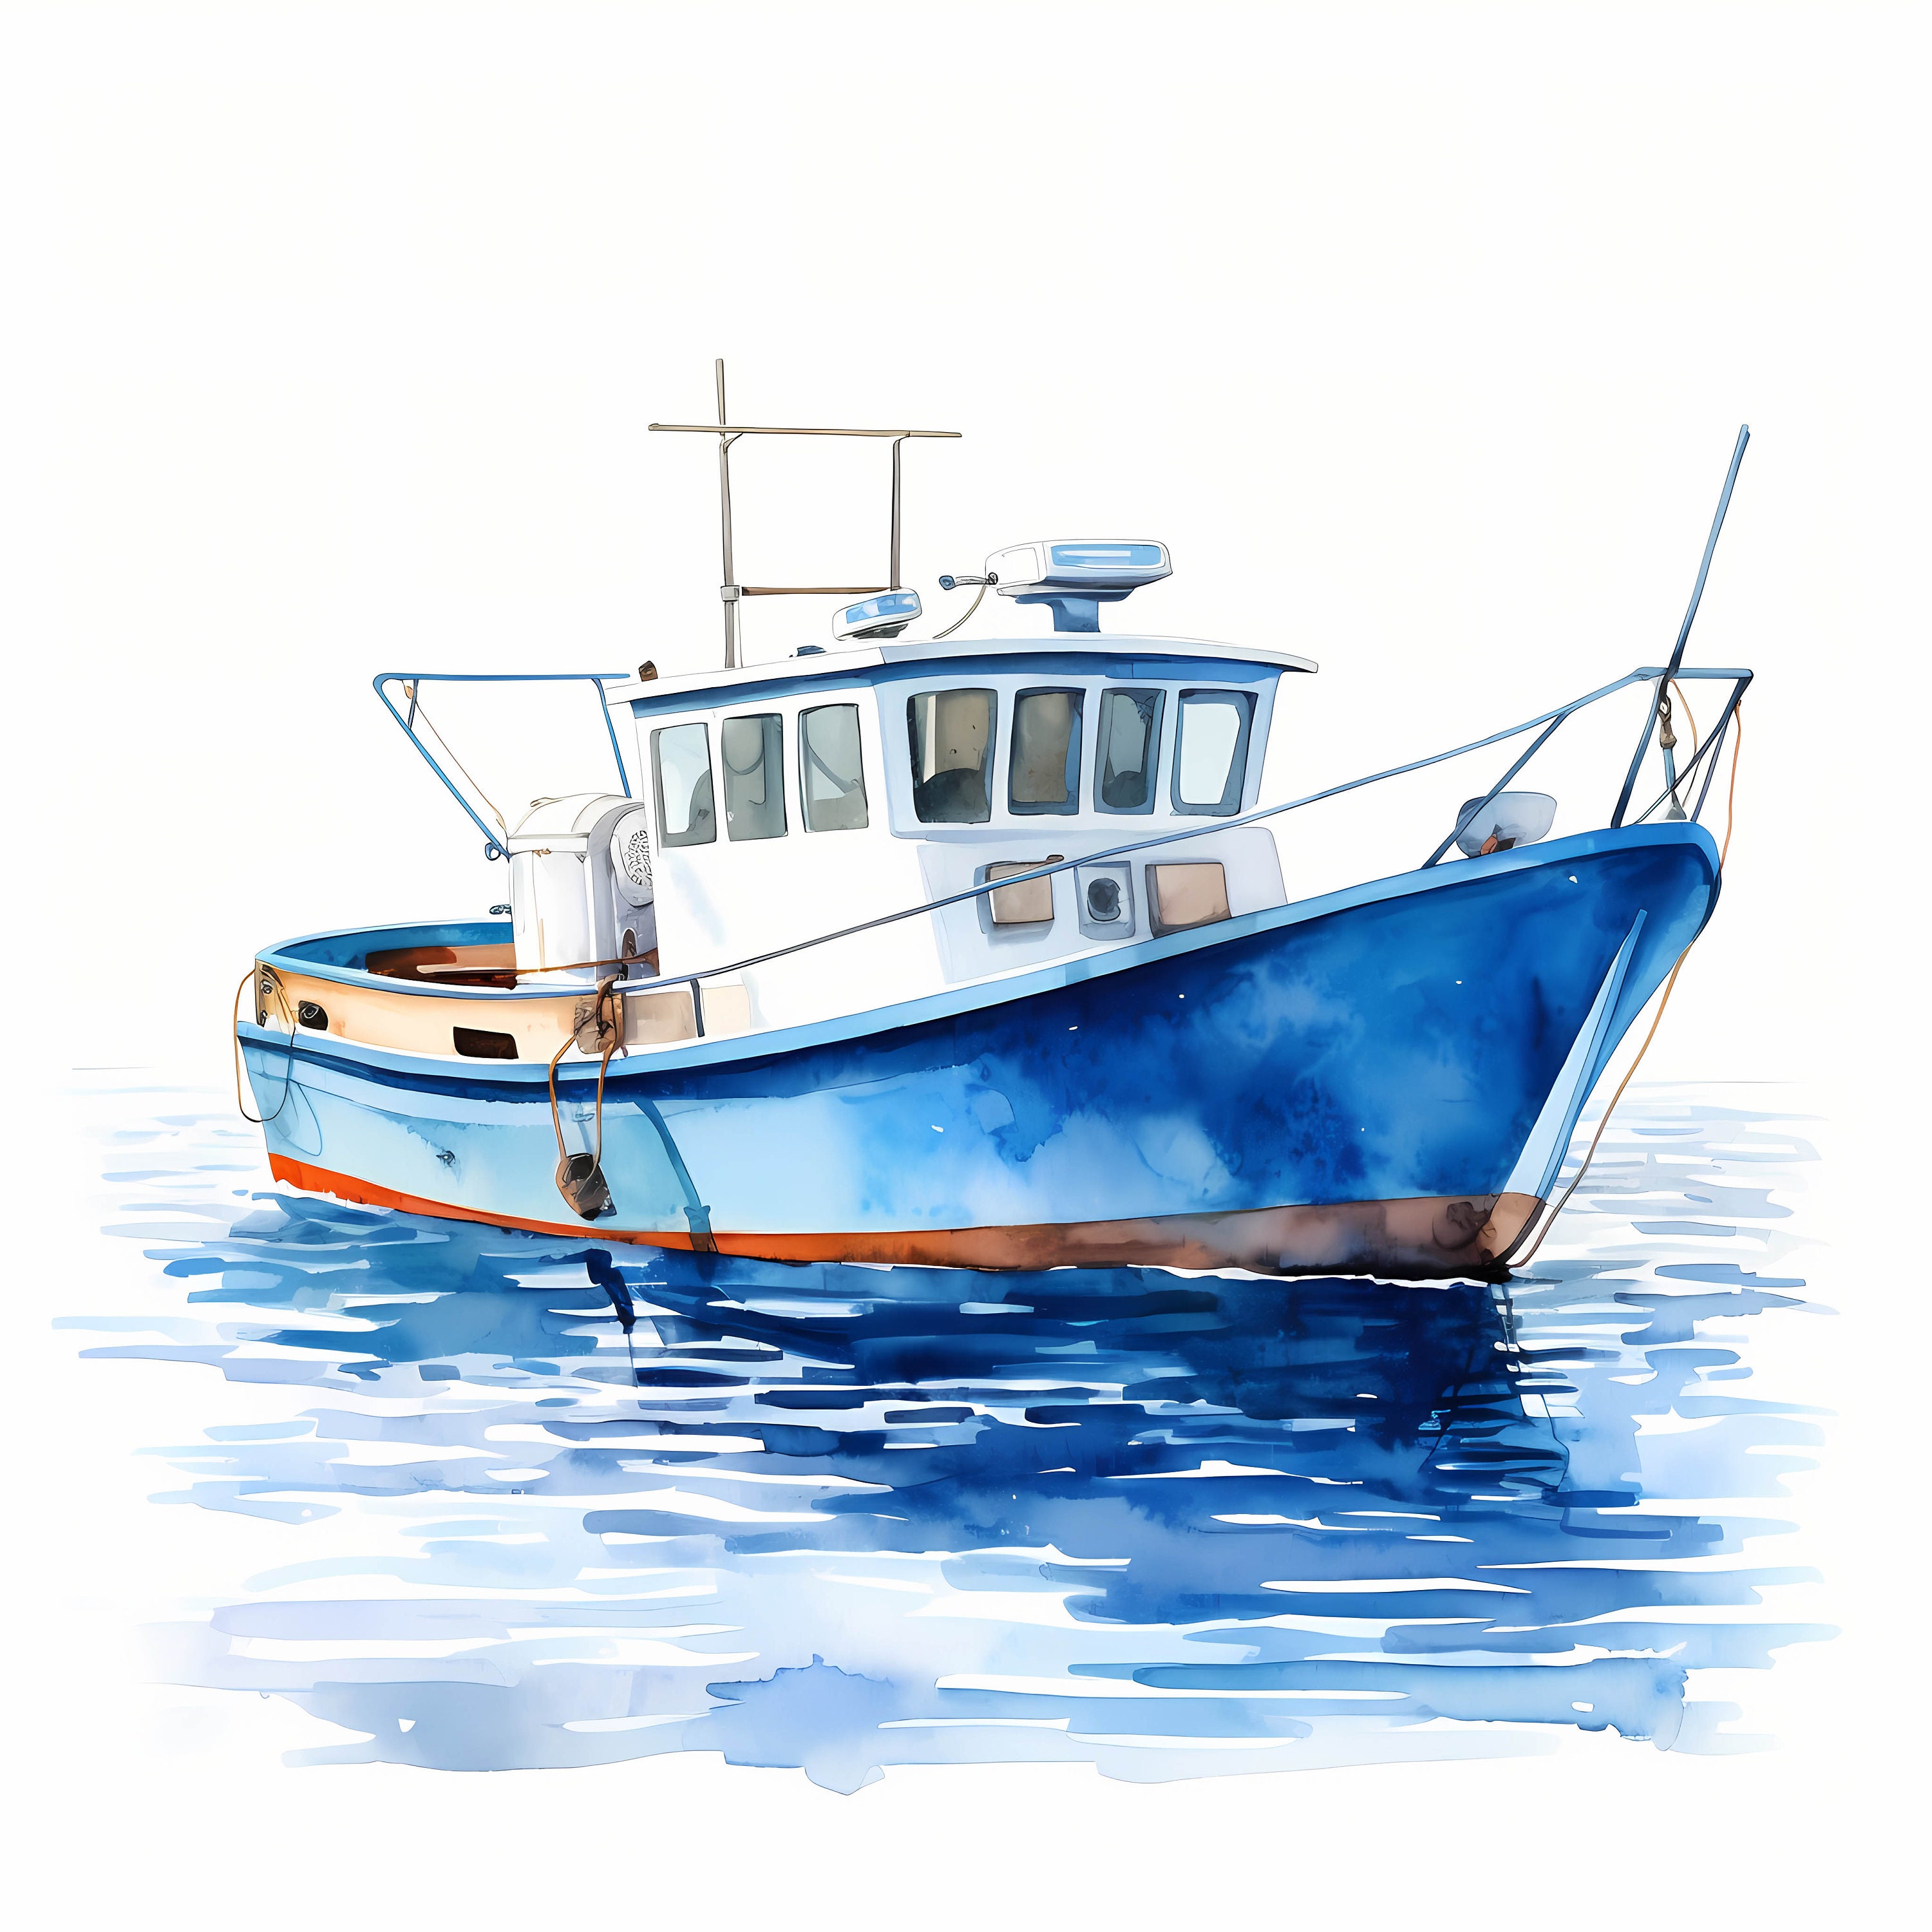 Fishing Boat Watercolor Clipart Bundle, Fishing Boat Watercolor  Illustration Set, Fishing Boat Wall Decor, Digital Download, Commercial Use  